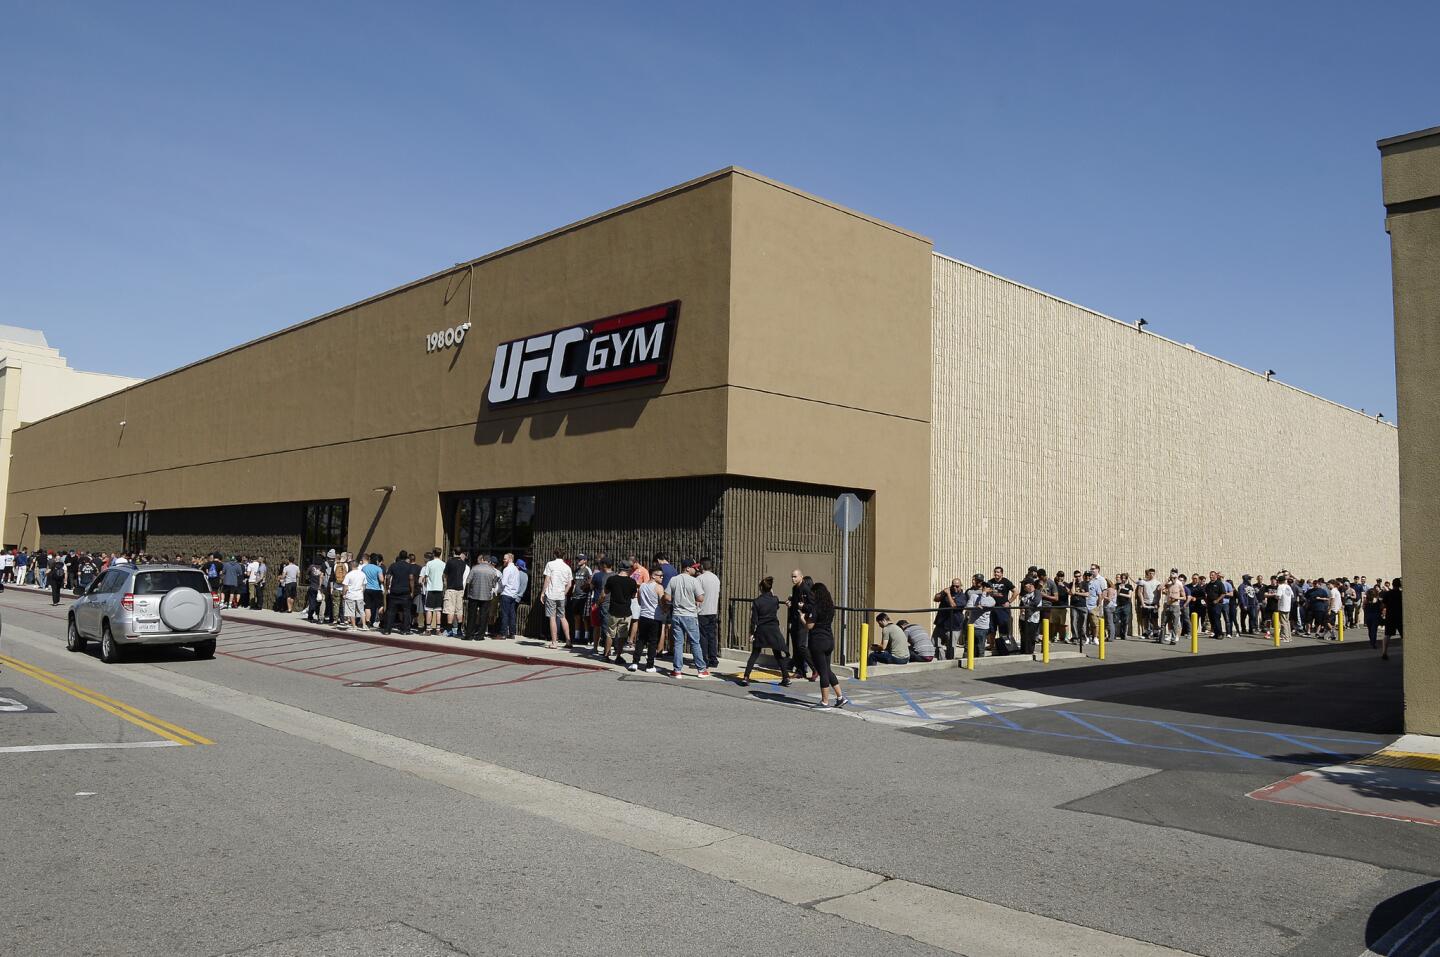 TORRANCE, CA - FEBRUARY 24: Fans wait in line for a news conference between UFC featherweight champion Conor McGregor and lightweight contender Nate Diaz participate in a news conference at UFC gym February 24, 2016, in Torrance, California. (Photo by Kevork Djansezian/Getty Images) ** OUTS - ELSENT, FPG, CM - OUTS * NM, PH, VA if sourced by CT, LA or MoD **